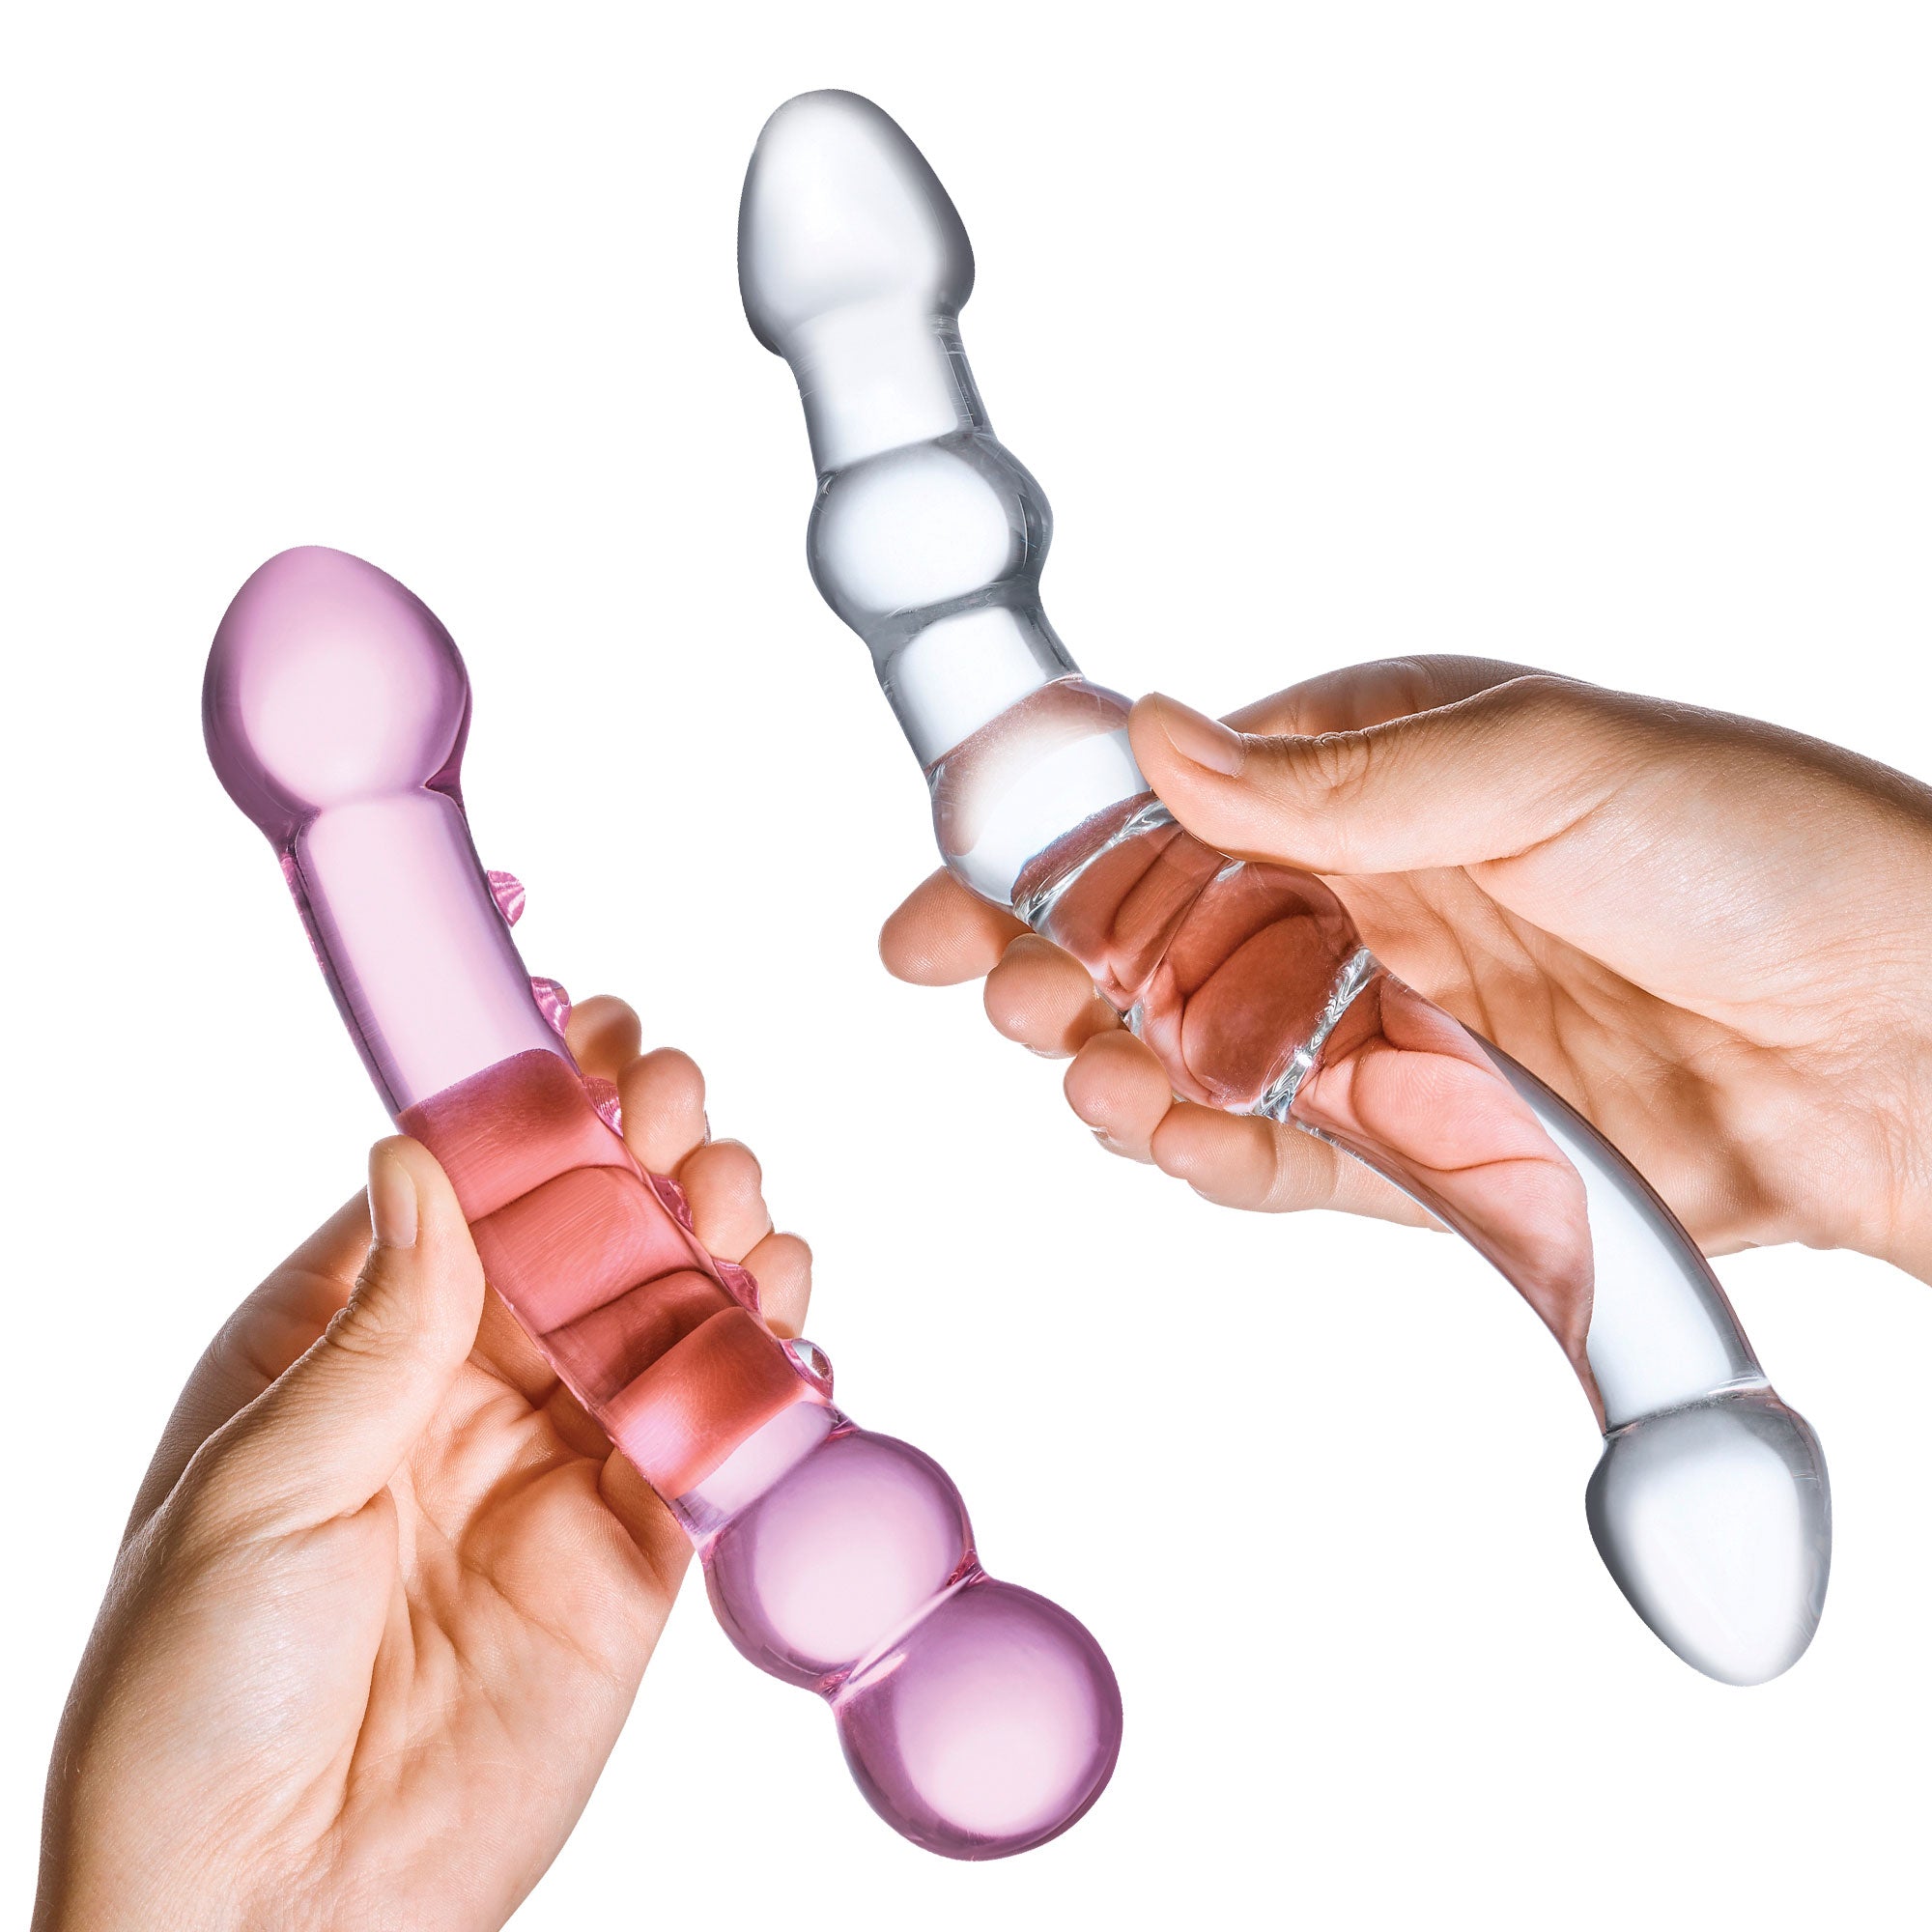 2 Pc Double Pleasure Glass Dildo Set in Pink/Clear by Glas